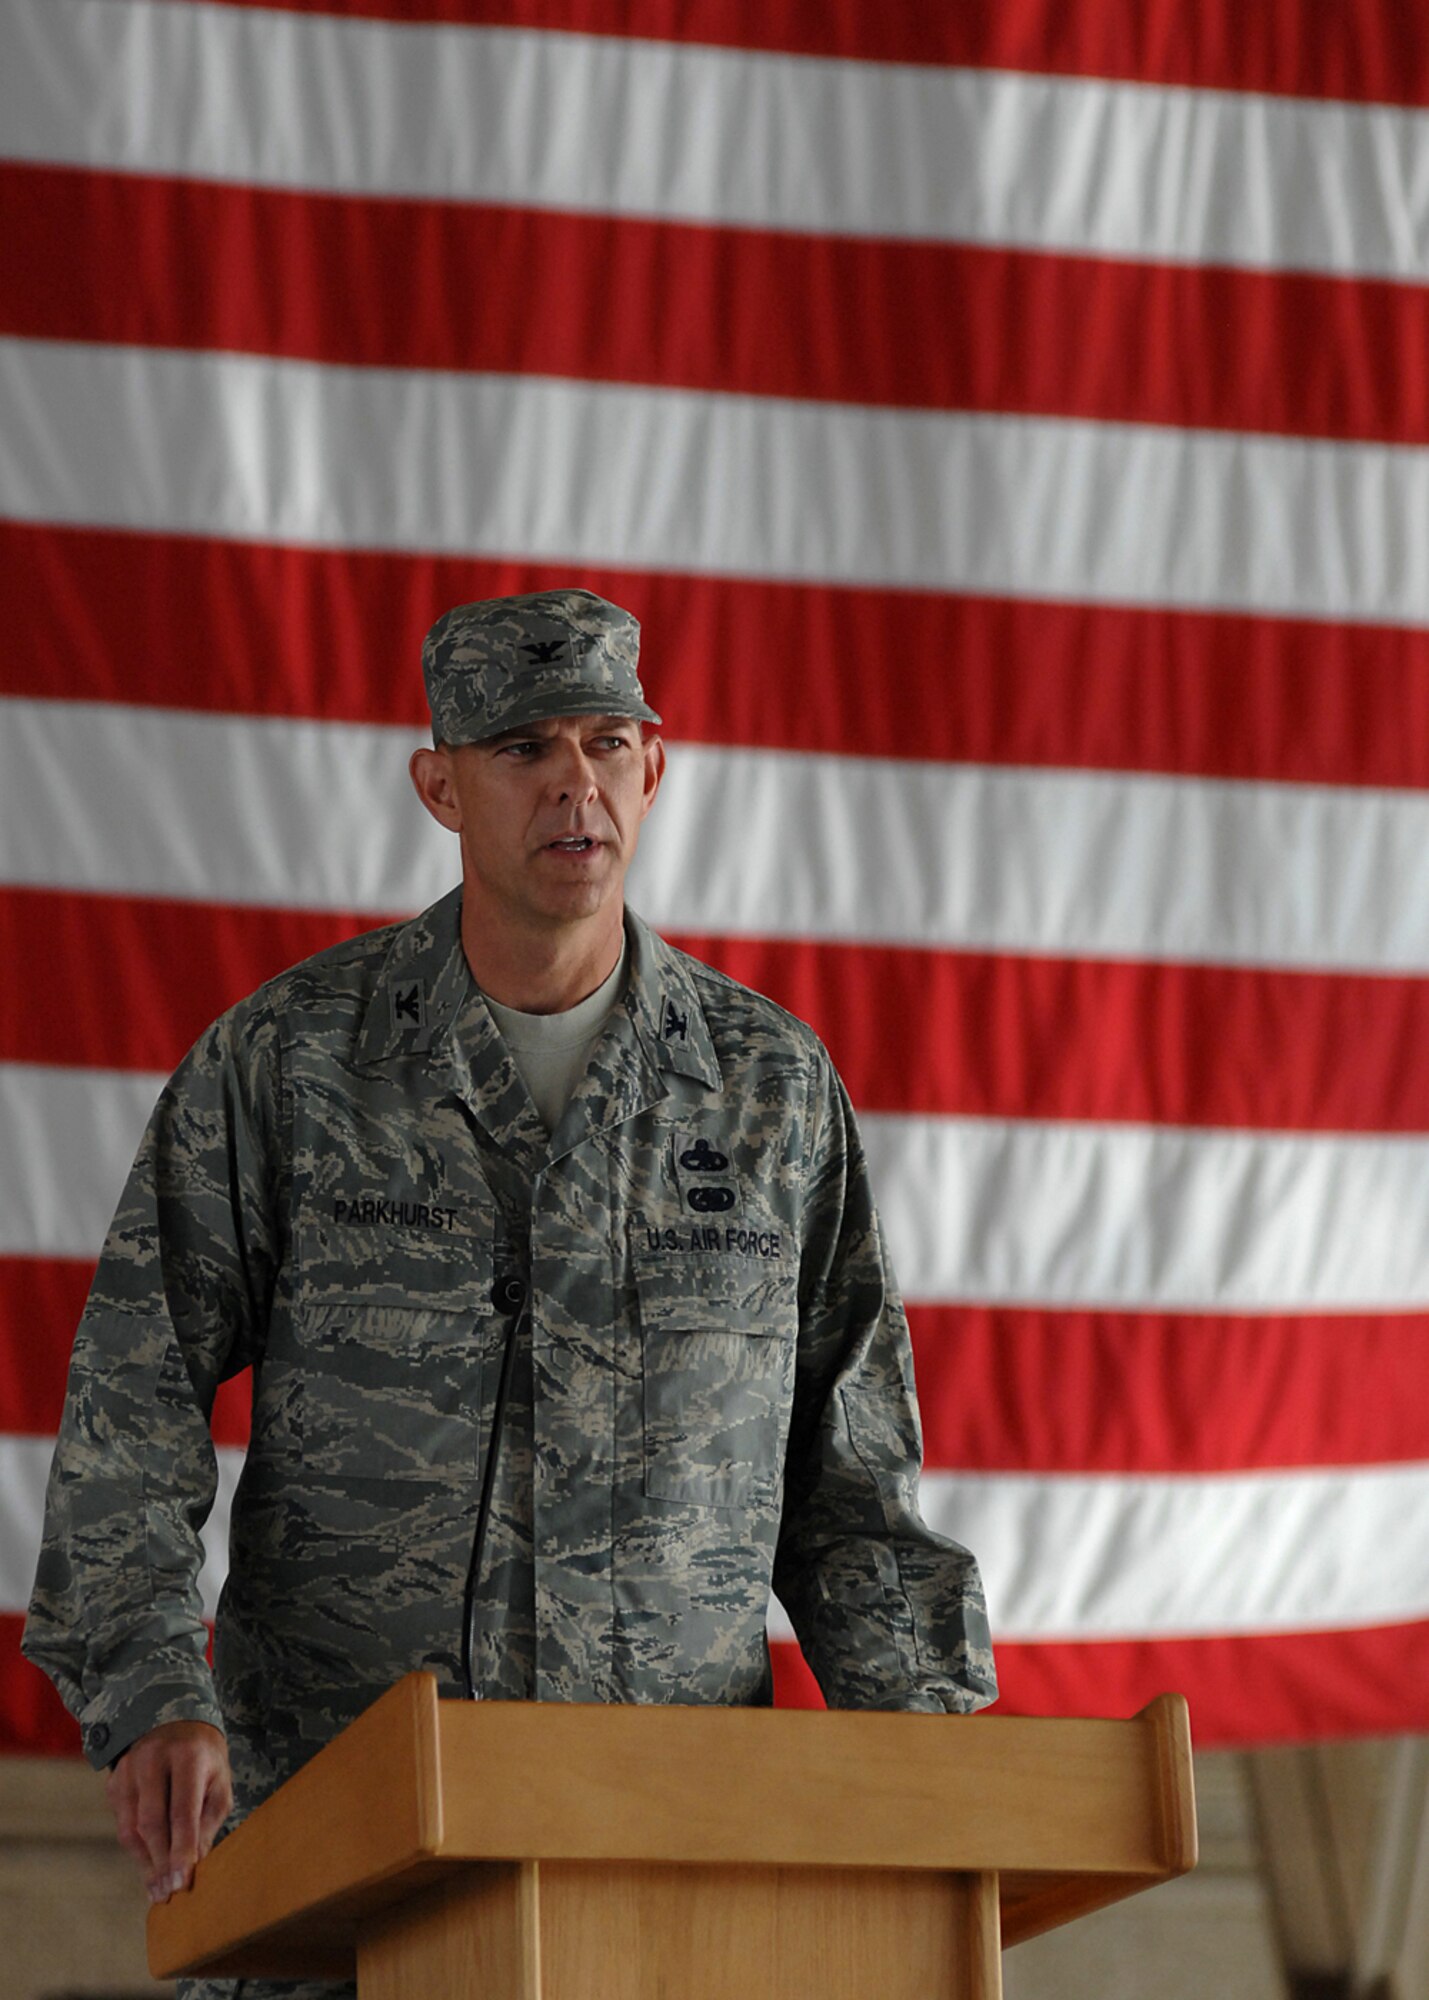 Col. Geoffrey Parkhurst, the new 56th Maintenance Group commander, delivers remarks to members of the audience at the 56th MXG change of command ceremony Aug. 29.